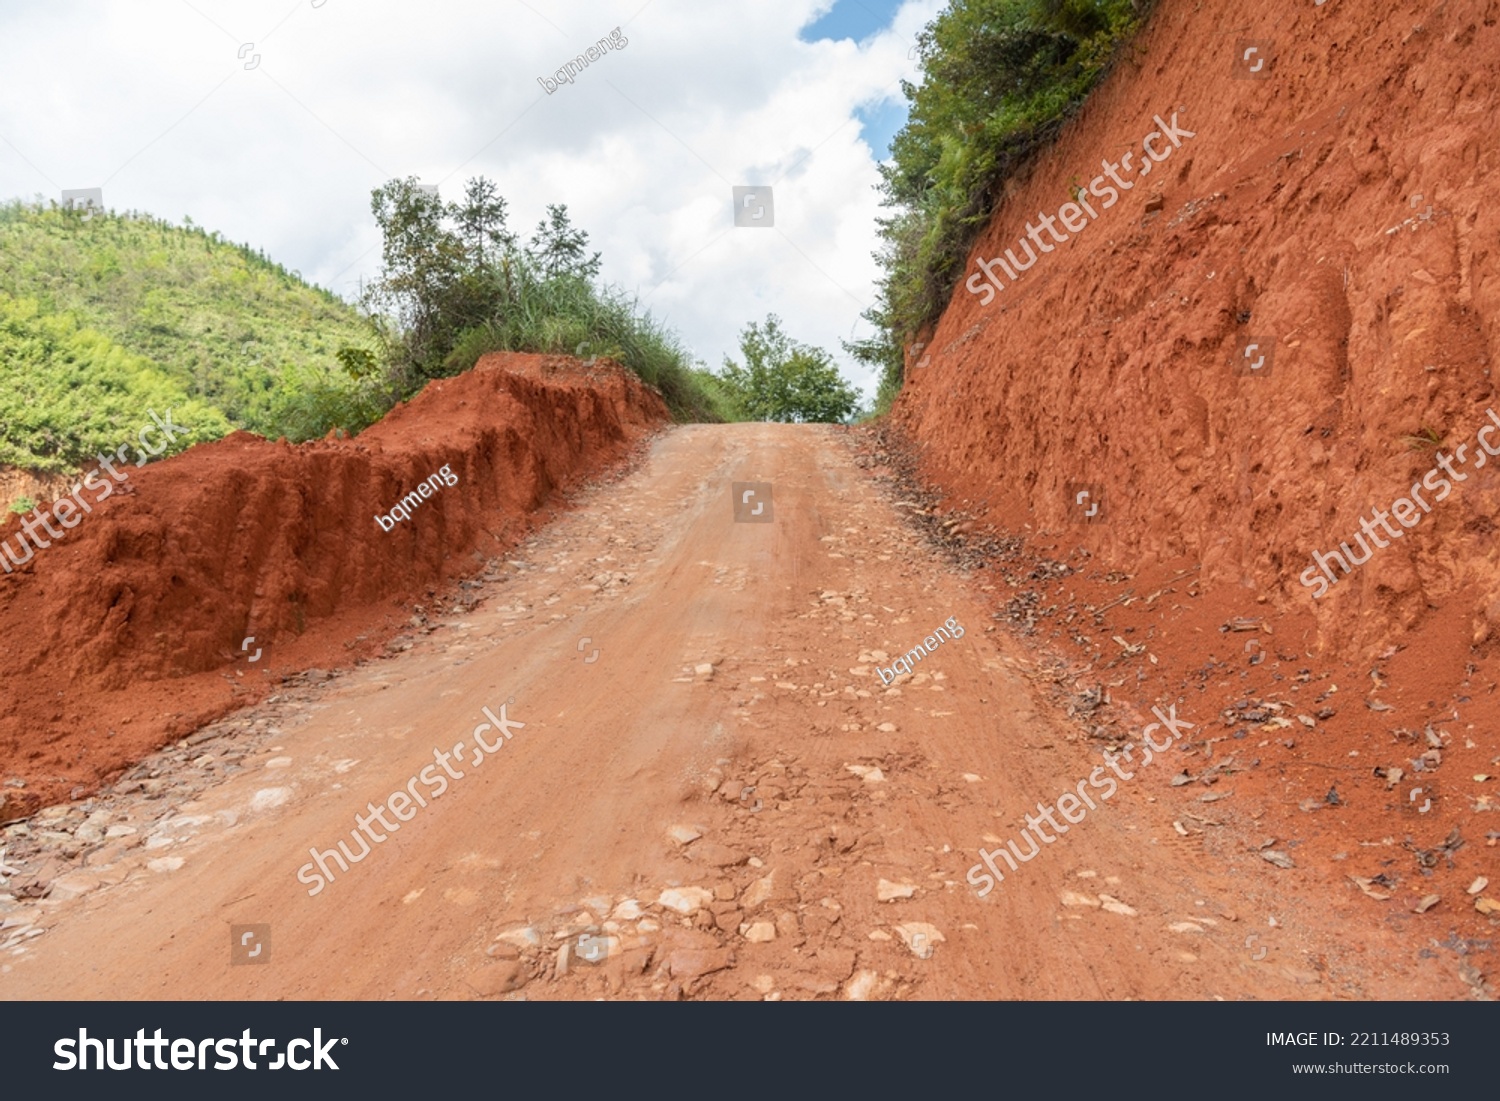 Rural mountain dirt uphill road view #2211489353